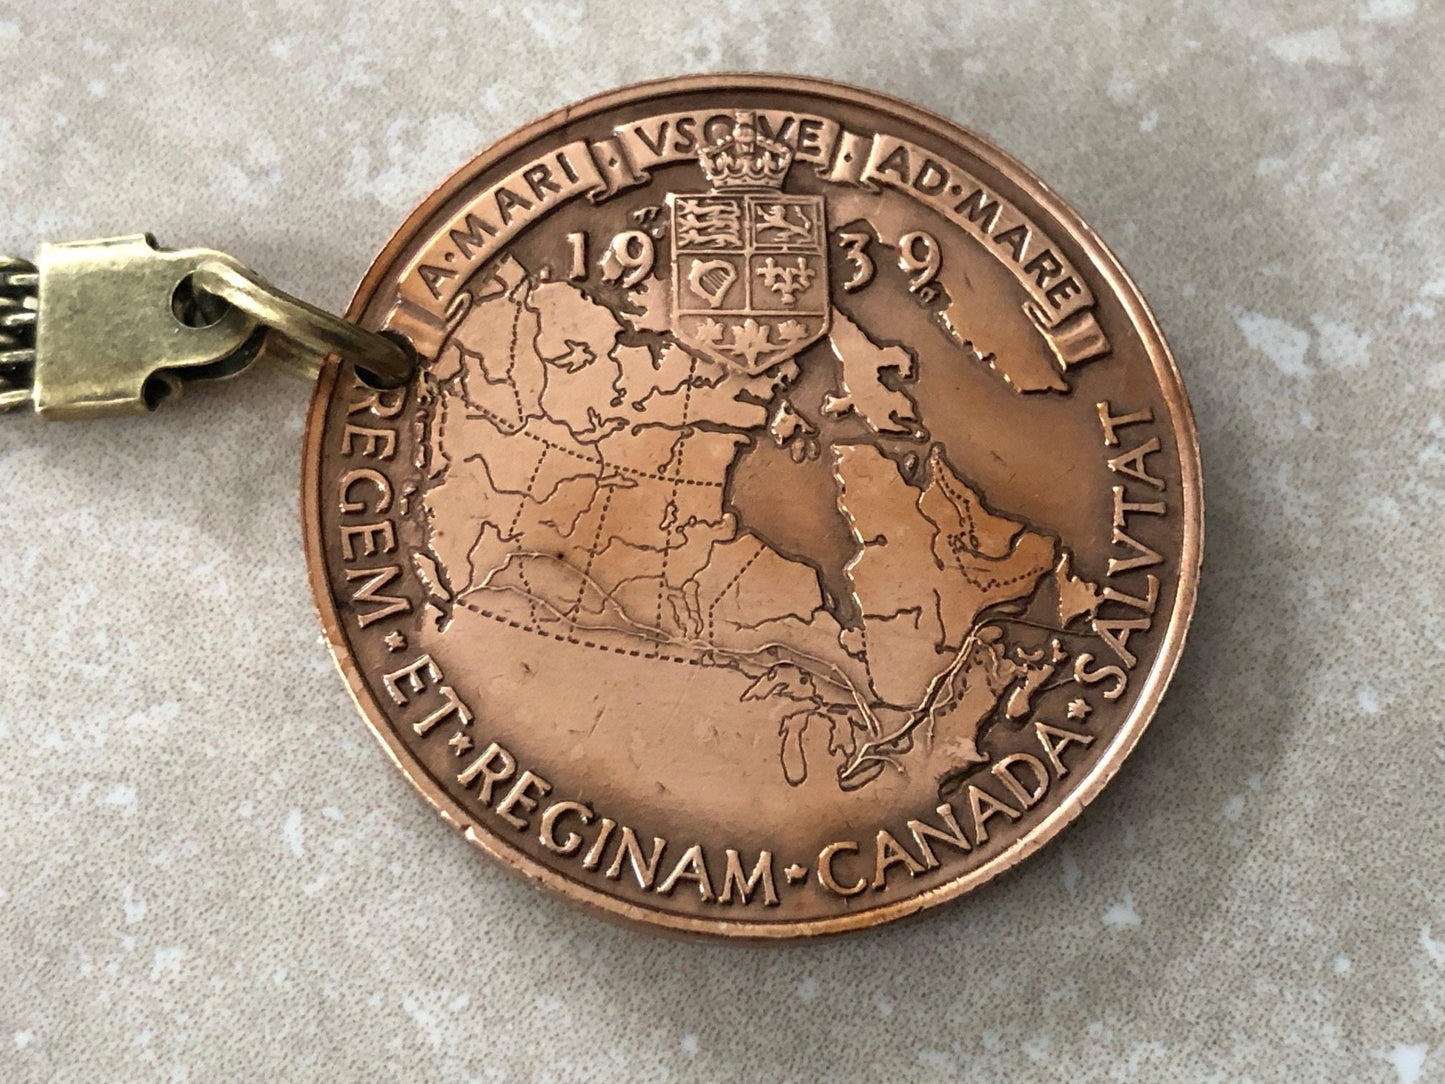 Coin 1939 Canada Keychain For Him Her Gift Medal Bronze Coin Rare Find Vintage Personal Handmade Gift Canadian